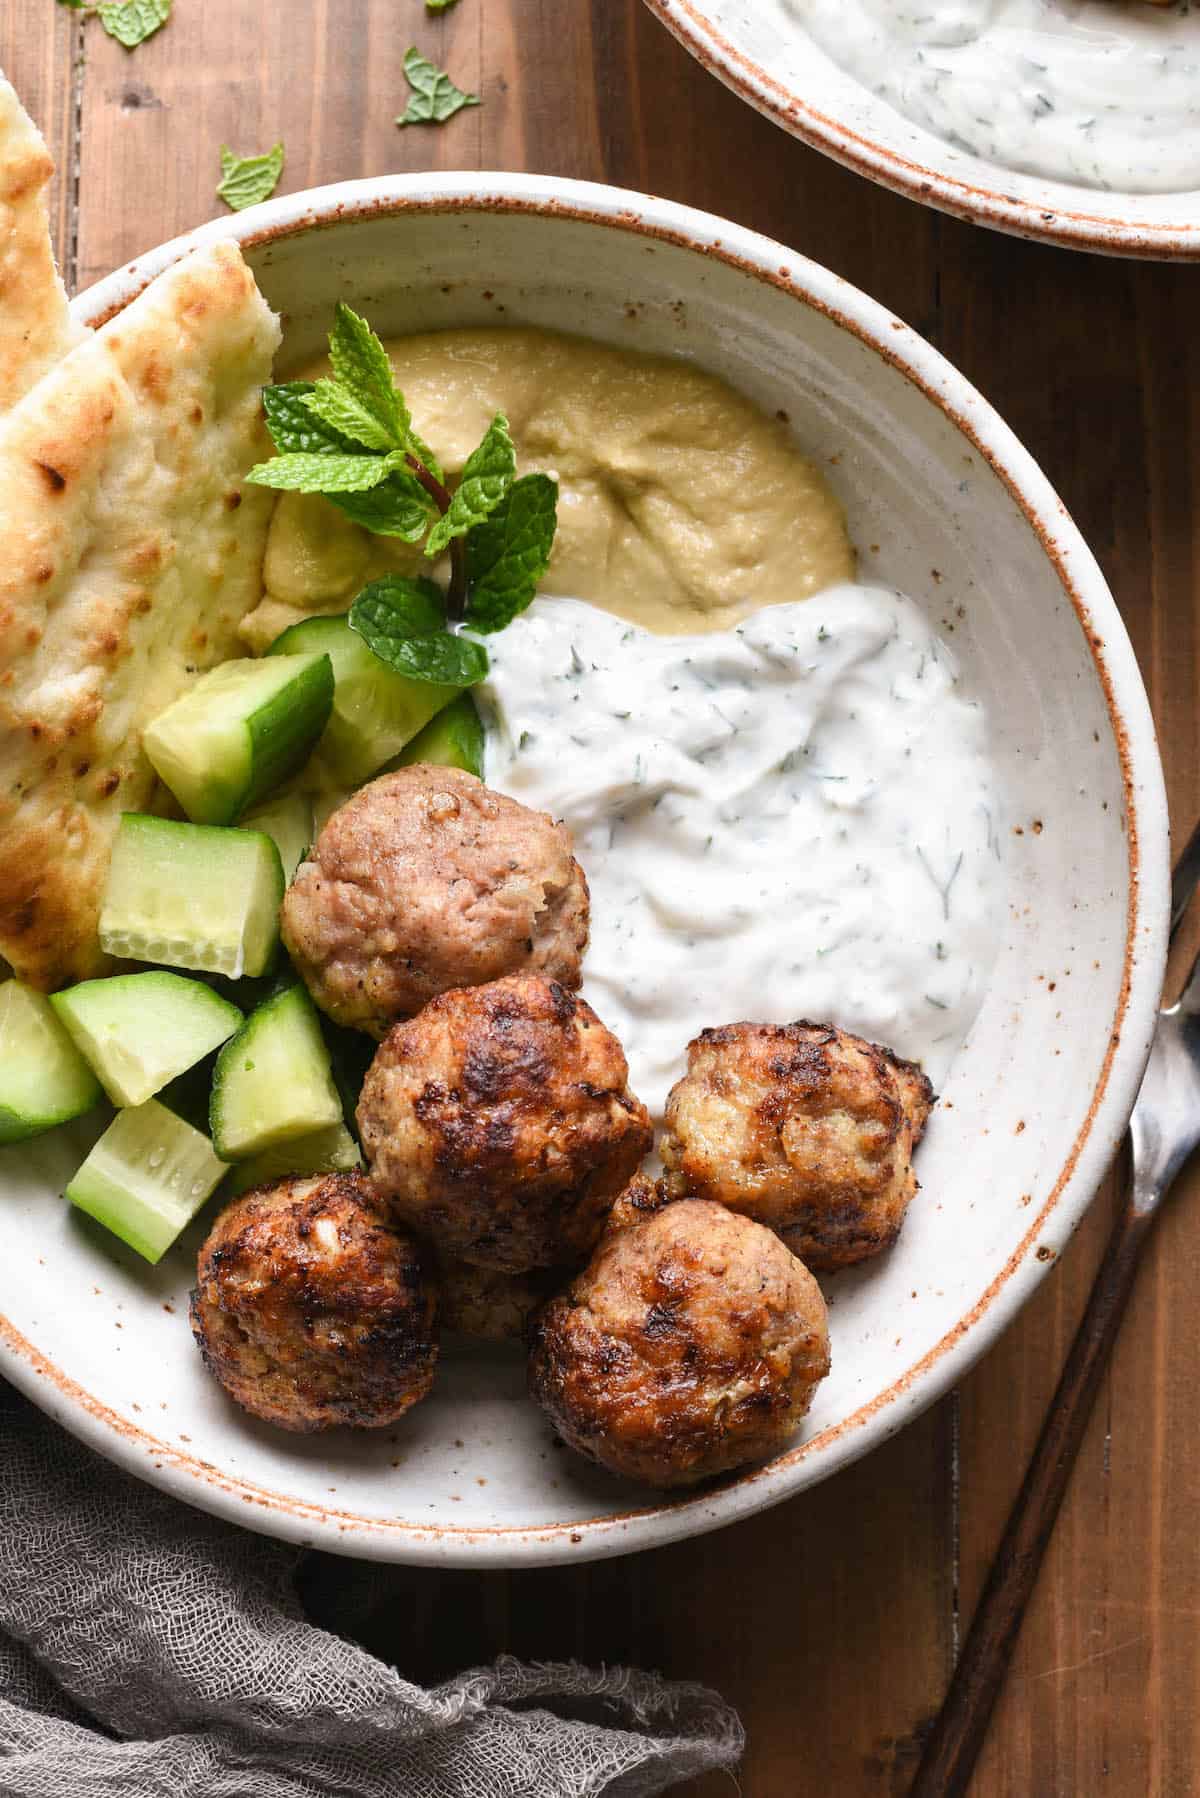 Overhead photo of rustic bowl filled with air fryer turkey meatballs, chopped cucumber, hummus, yogurt sauce, naan and a mint sprig garnish.